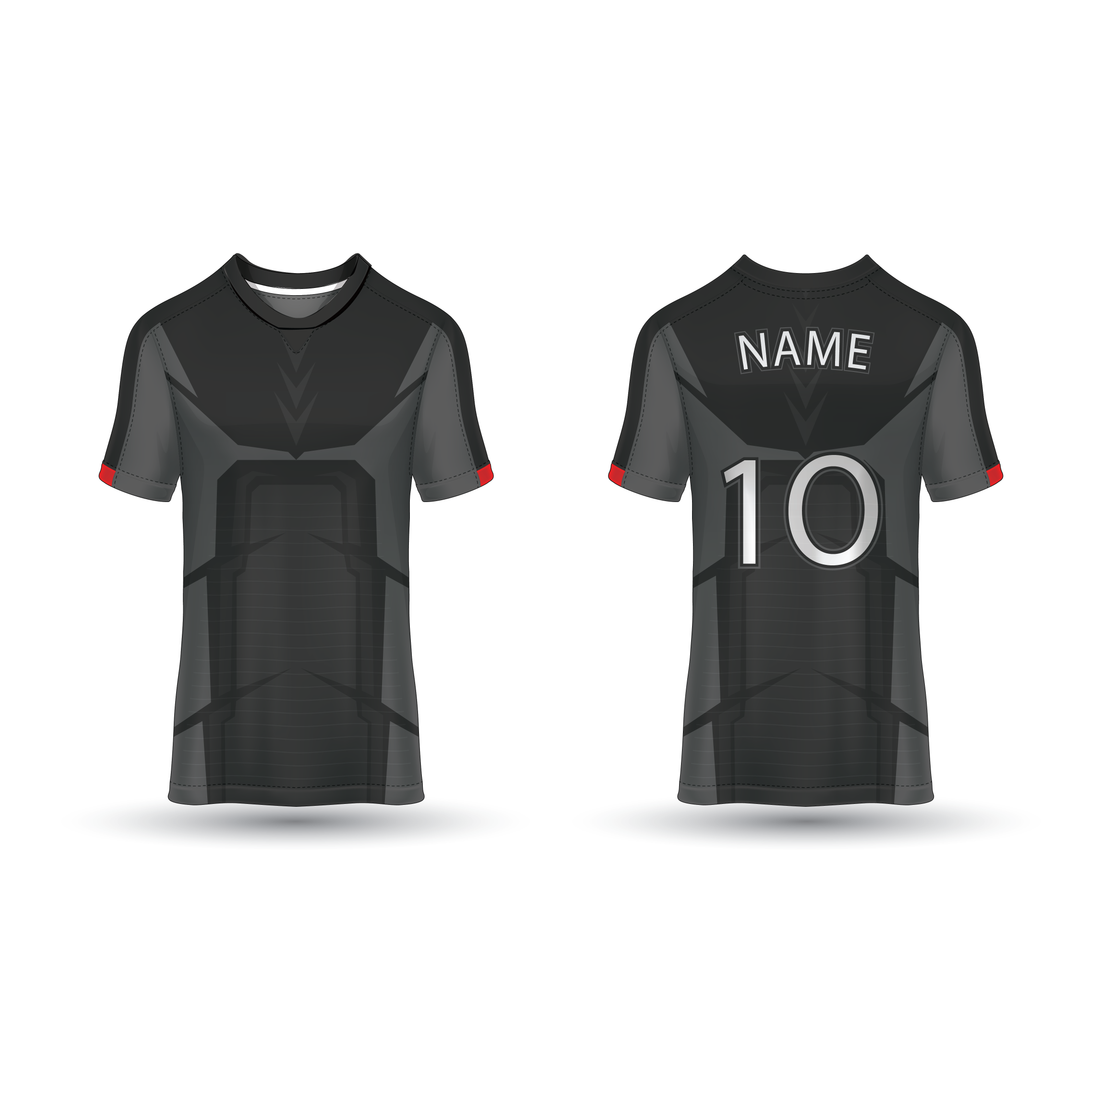 NEXT PRINT All Over Printed Customized Sublimation T-Shirt Unisex Sports Jersey Player Name & Number, Team Name NP50000207